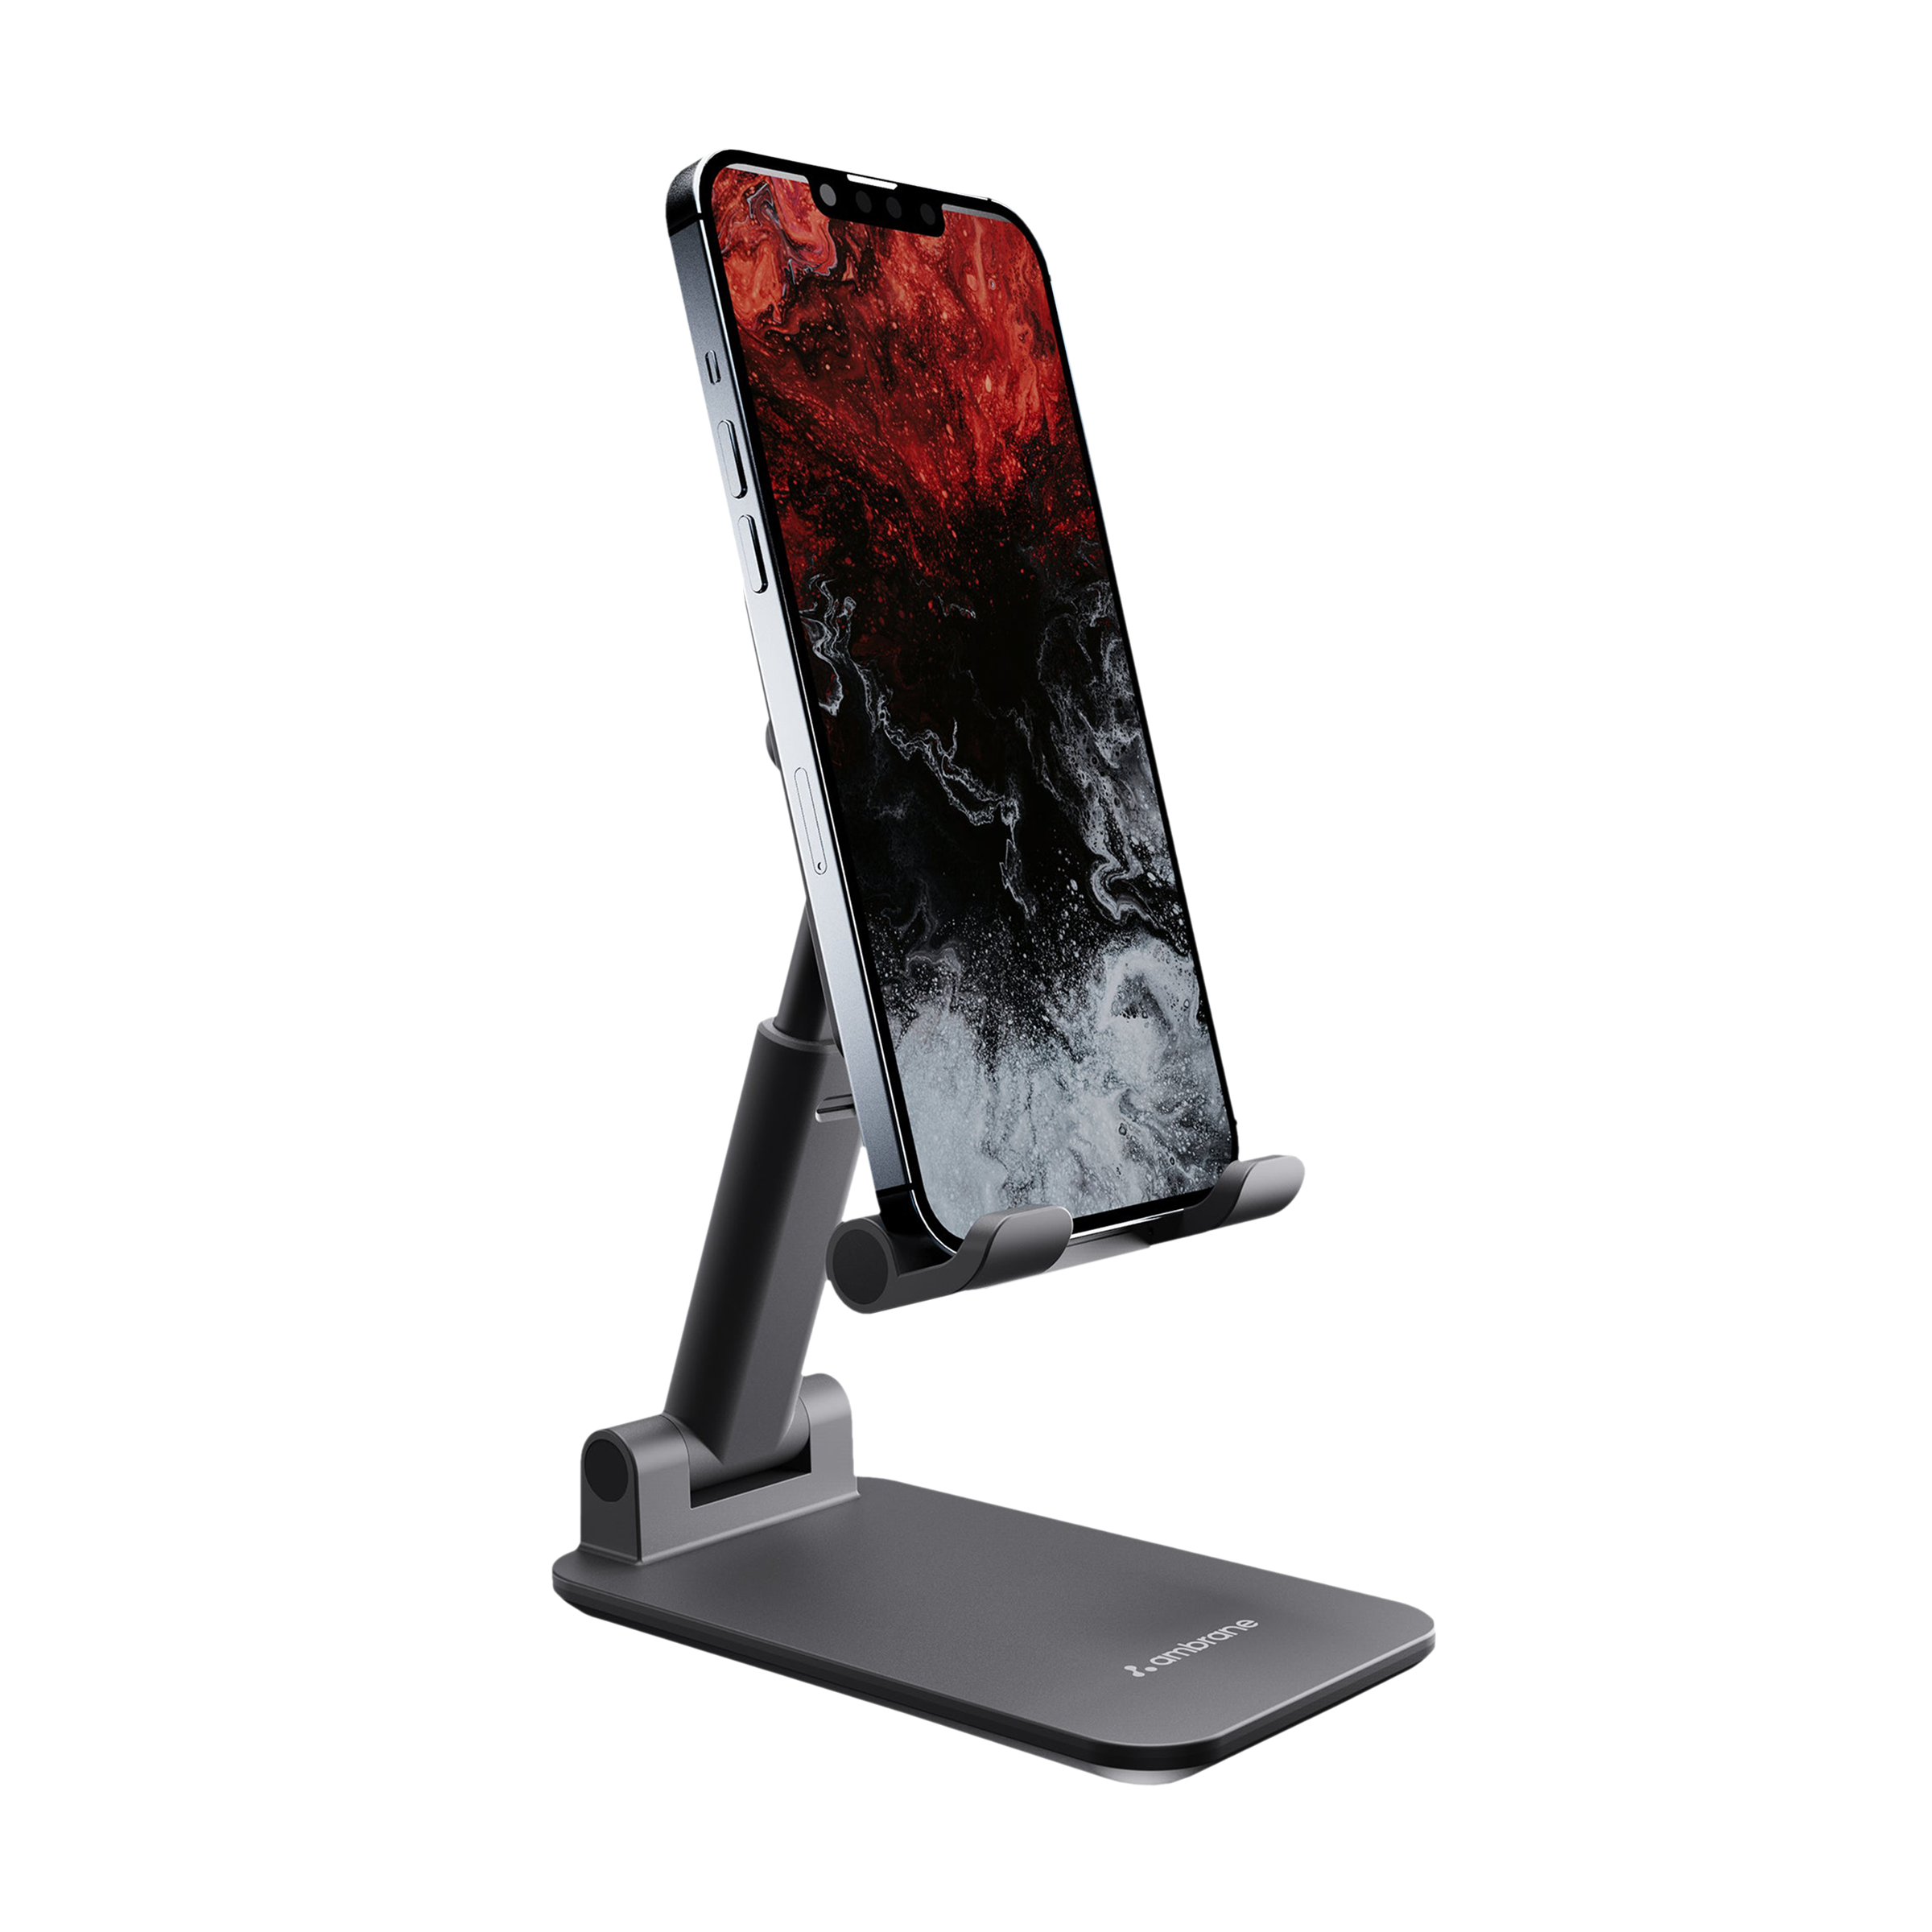 Desktop Phone Holder Support Telephone Bureau Stand for Cell Phone  Smartphone Iphone Stand Table Mobile Cellphone Bracket